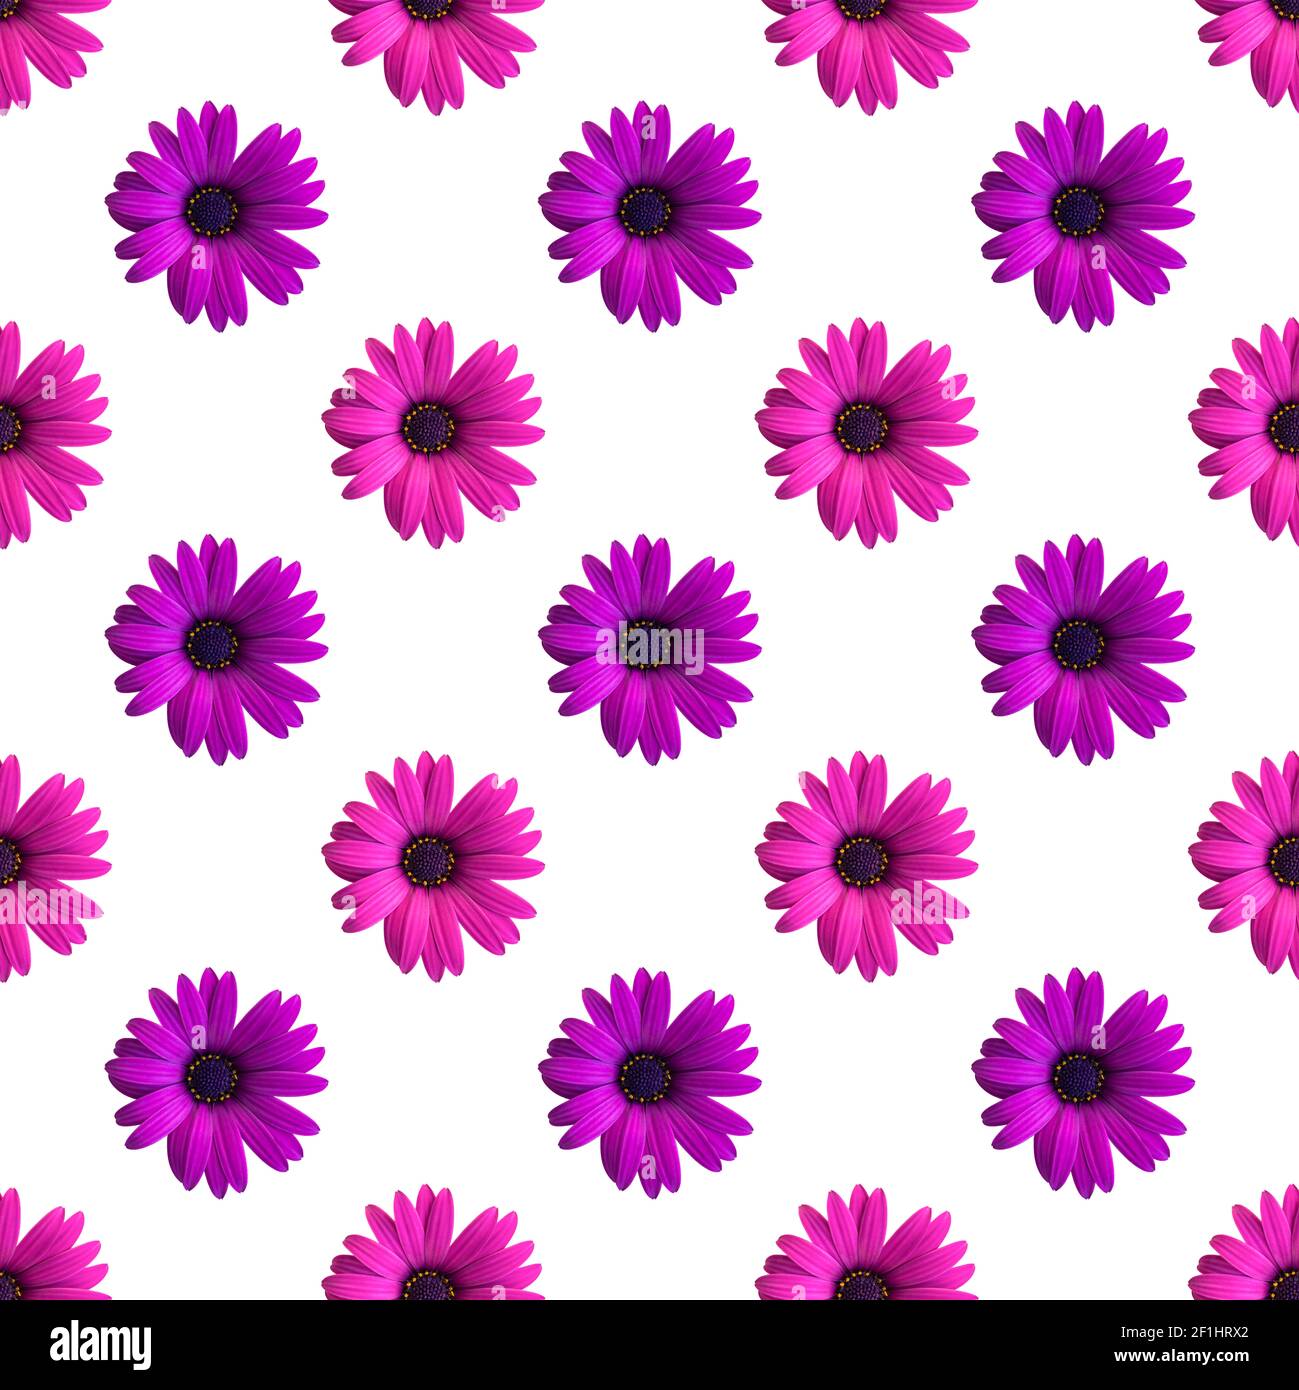 Beautiful violet and pink daisy flower heads seamless pattern on the white background. Top view of flowers Stock Photo